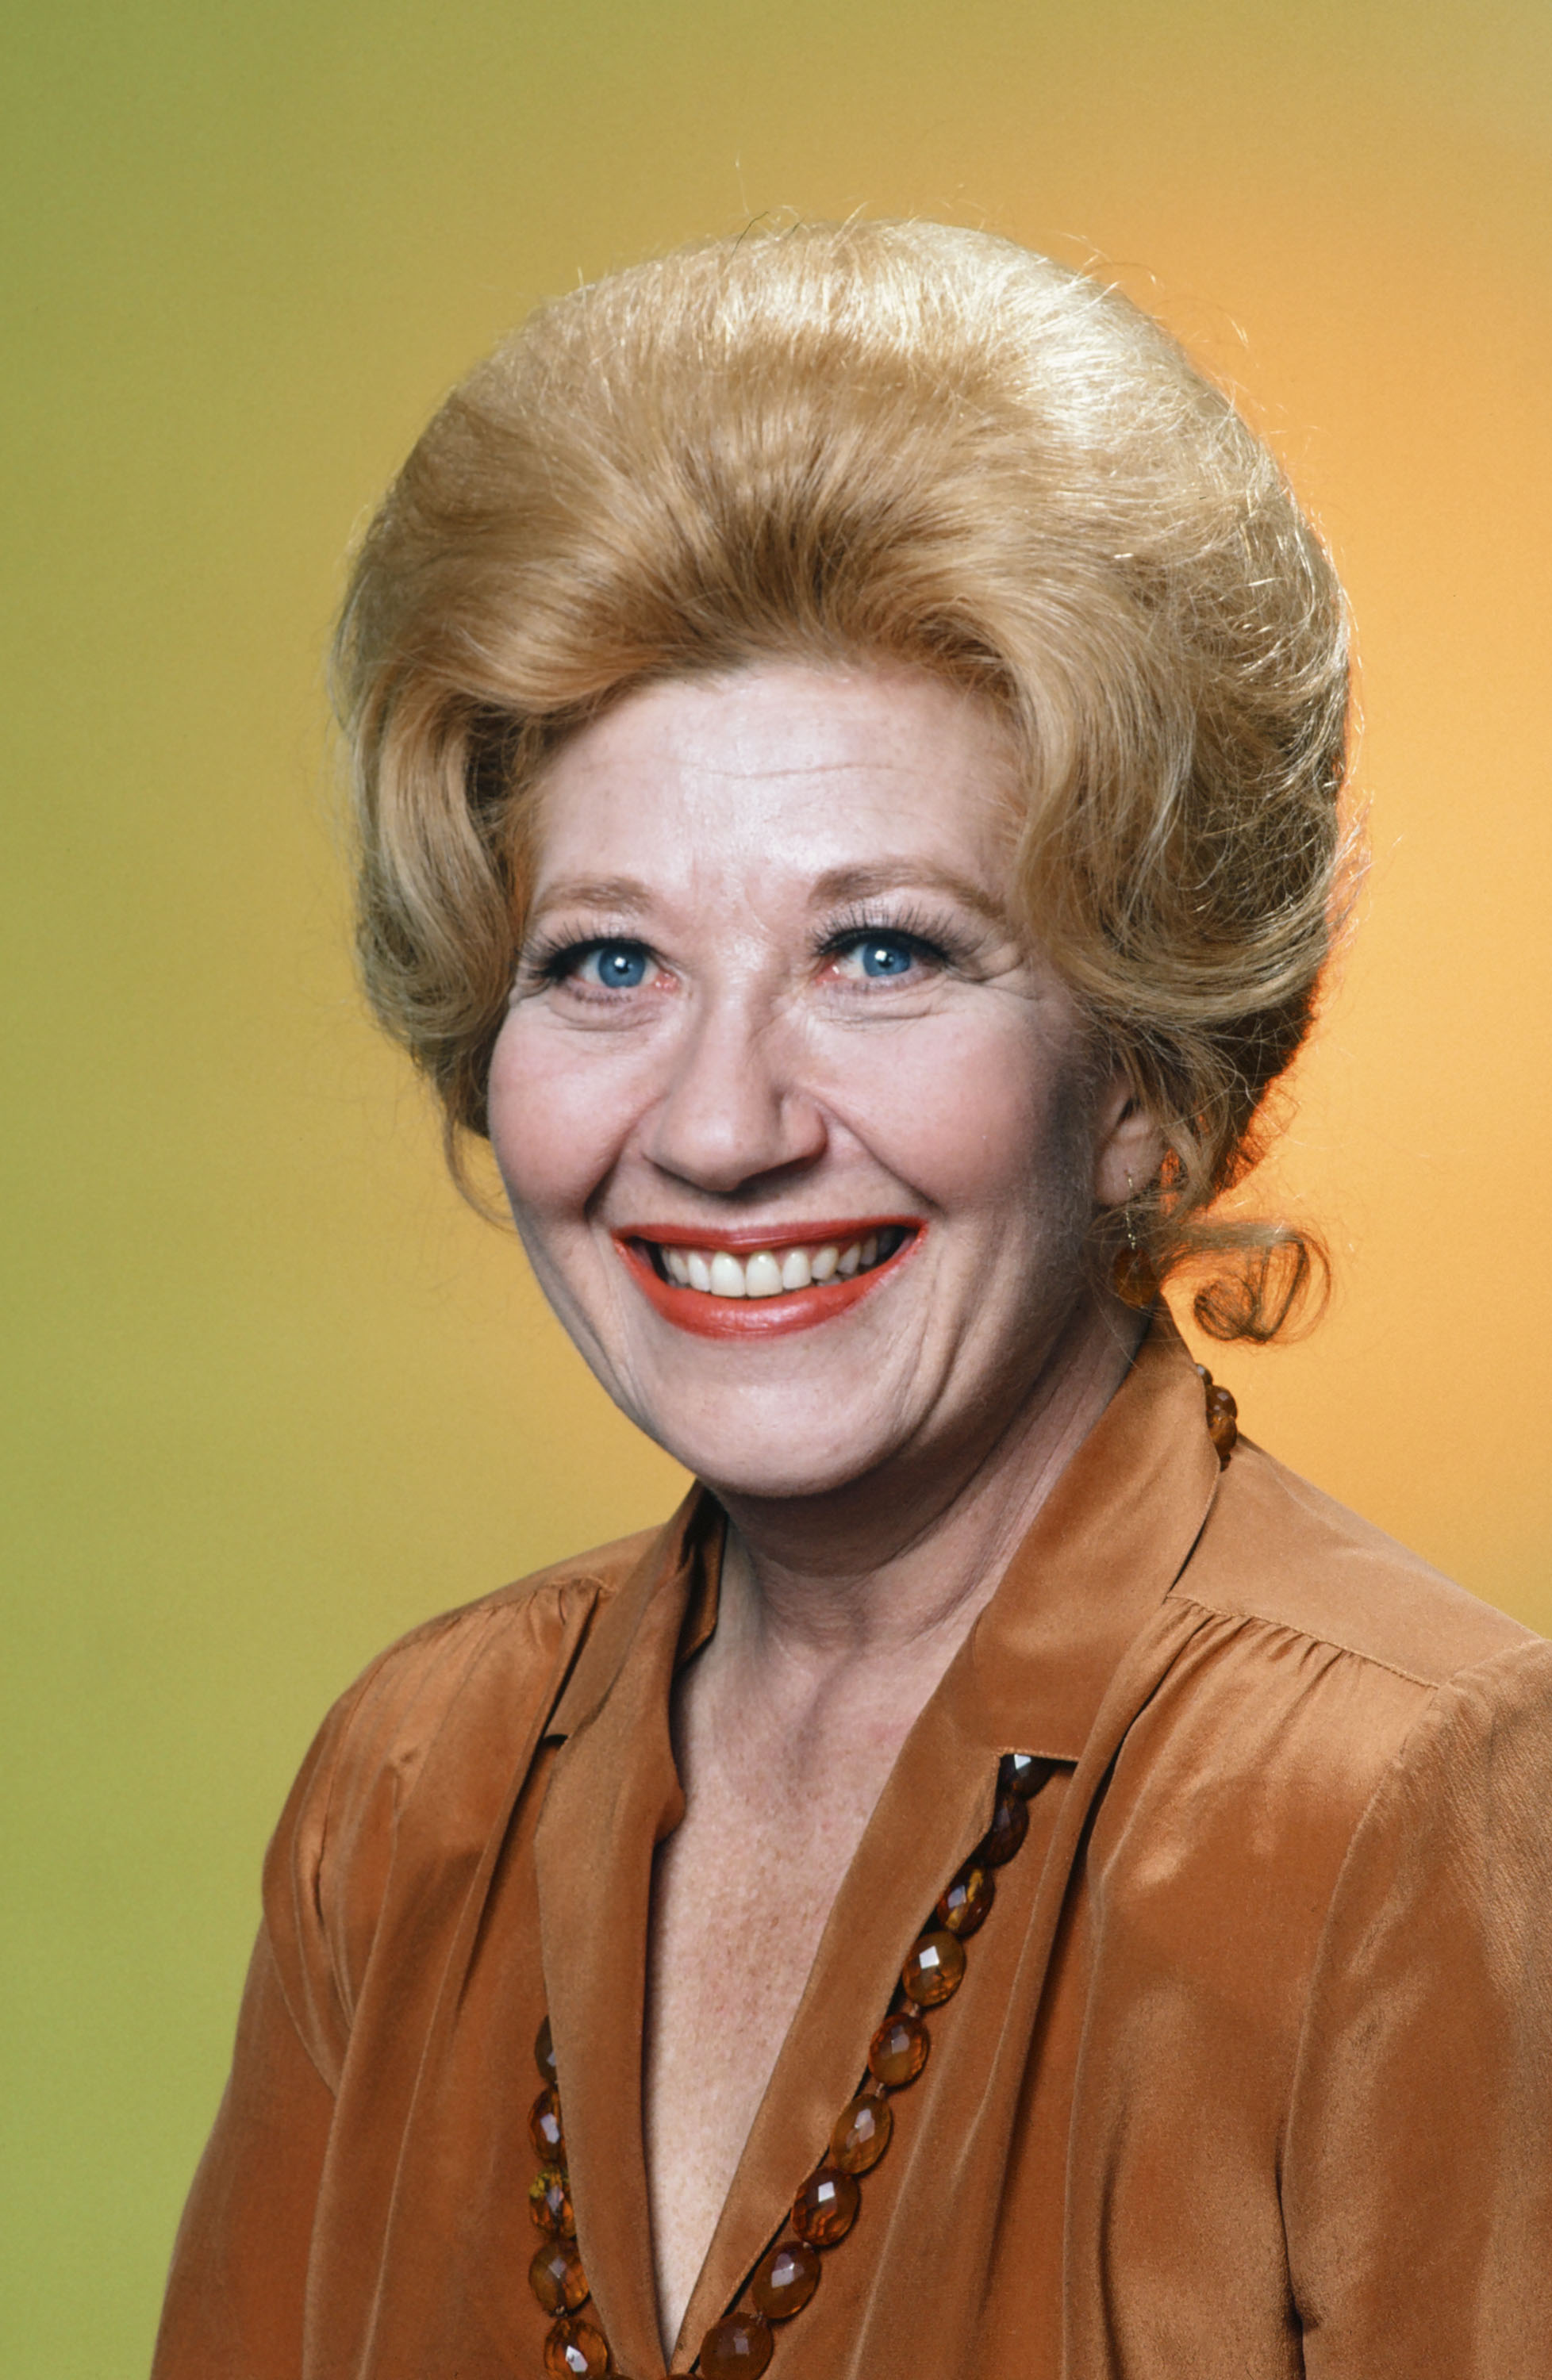 Charlotte Rae as Edna Garrett on "The Facts of Life" | Source: Getty Images